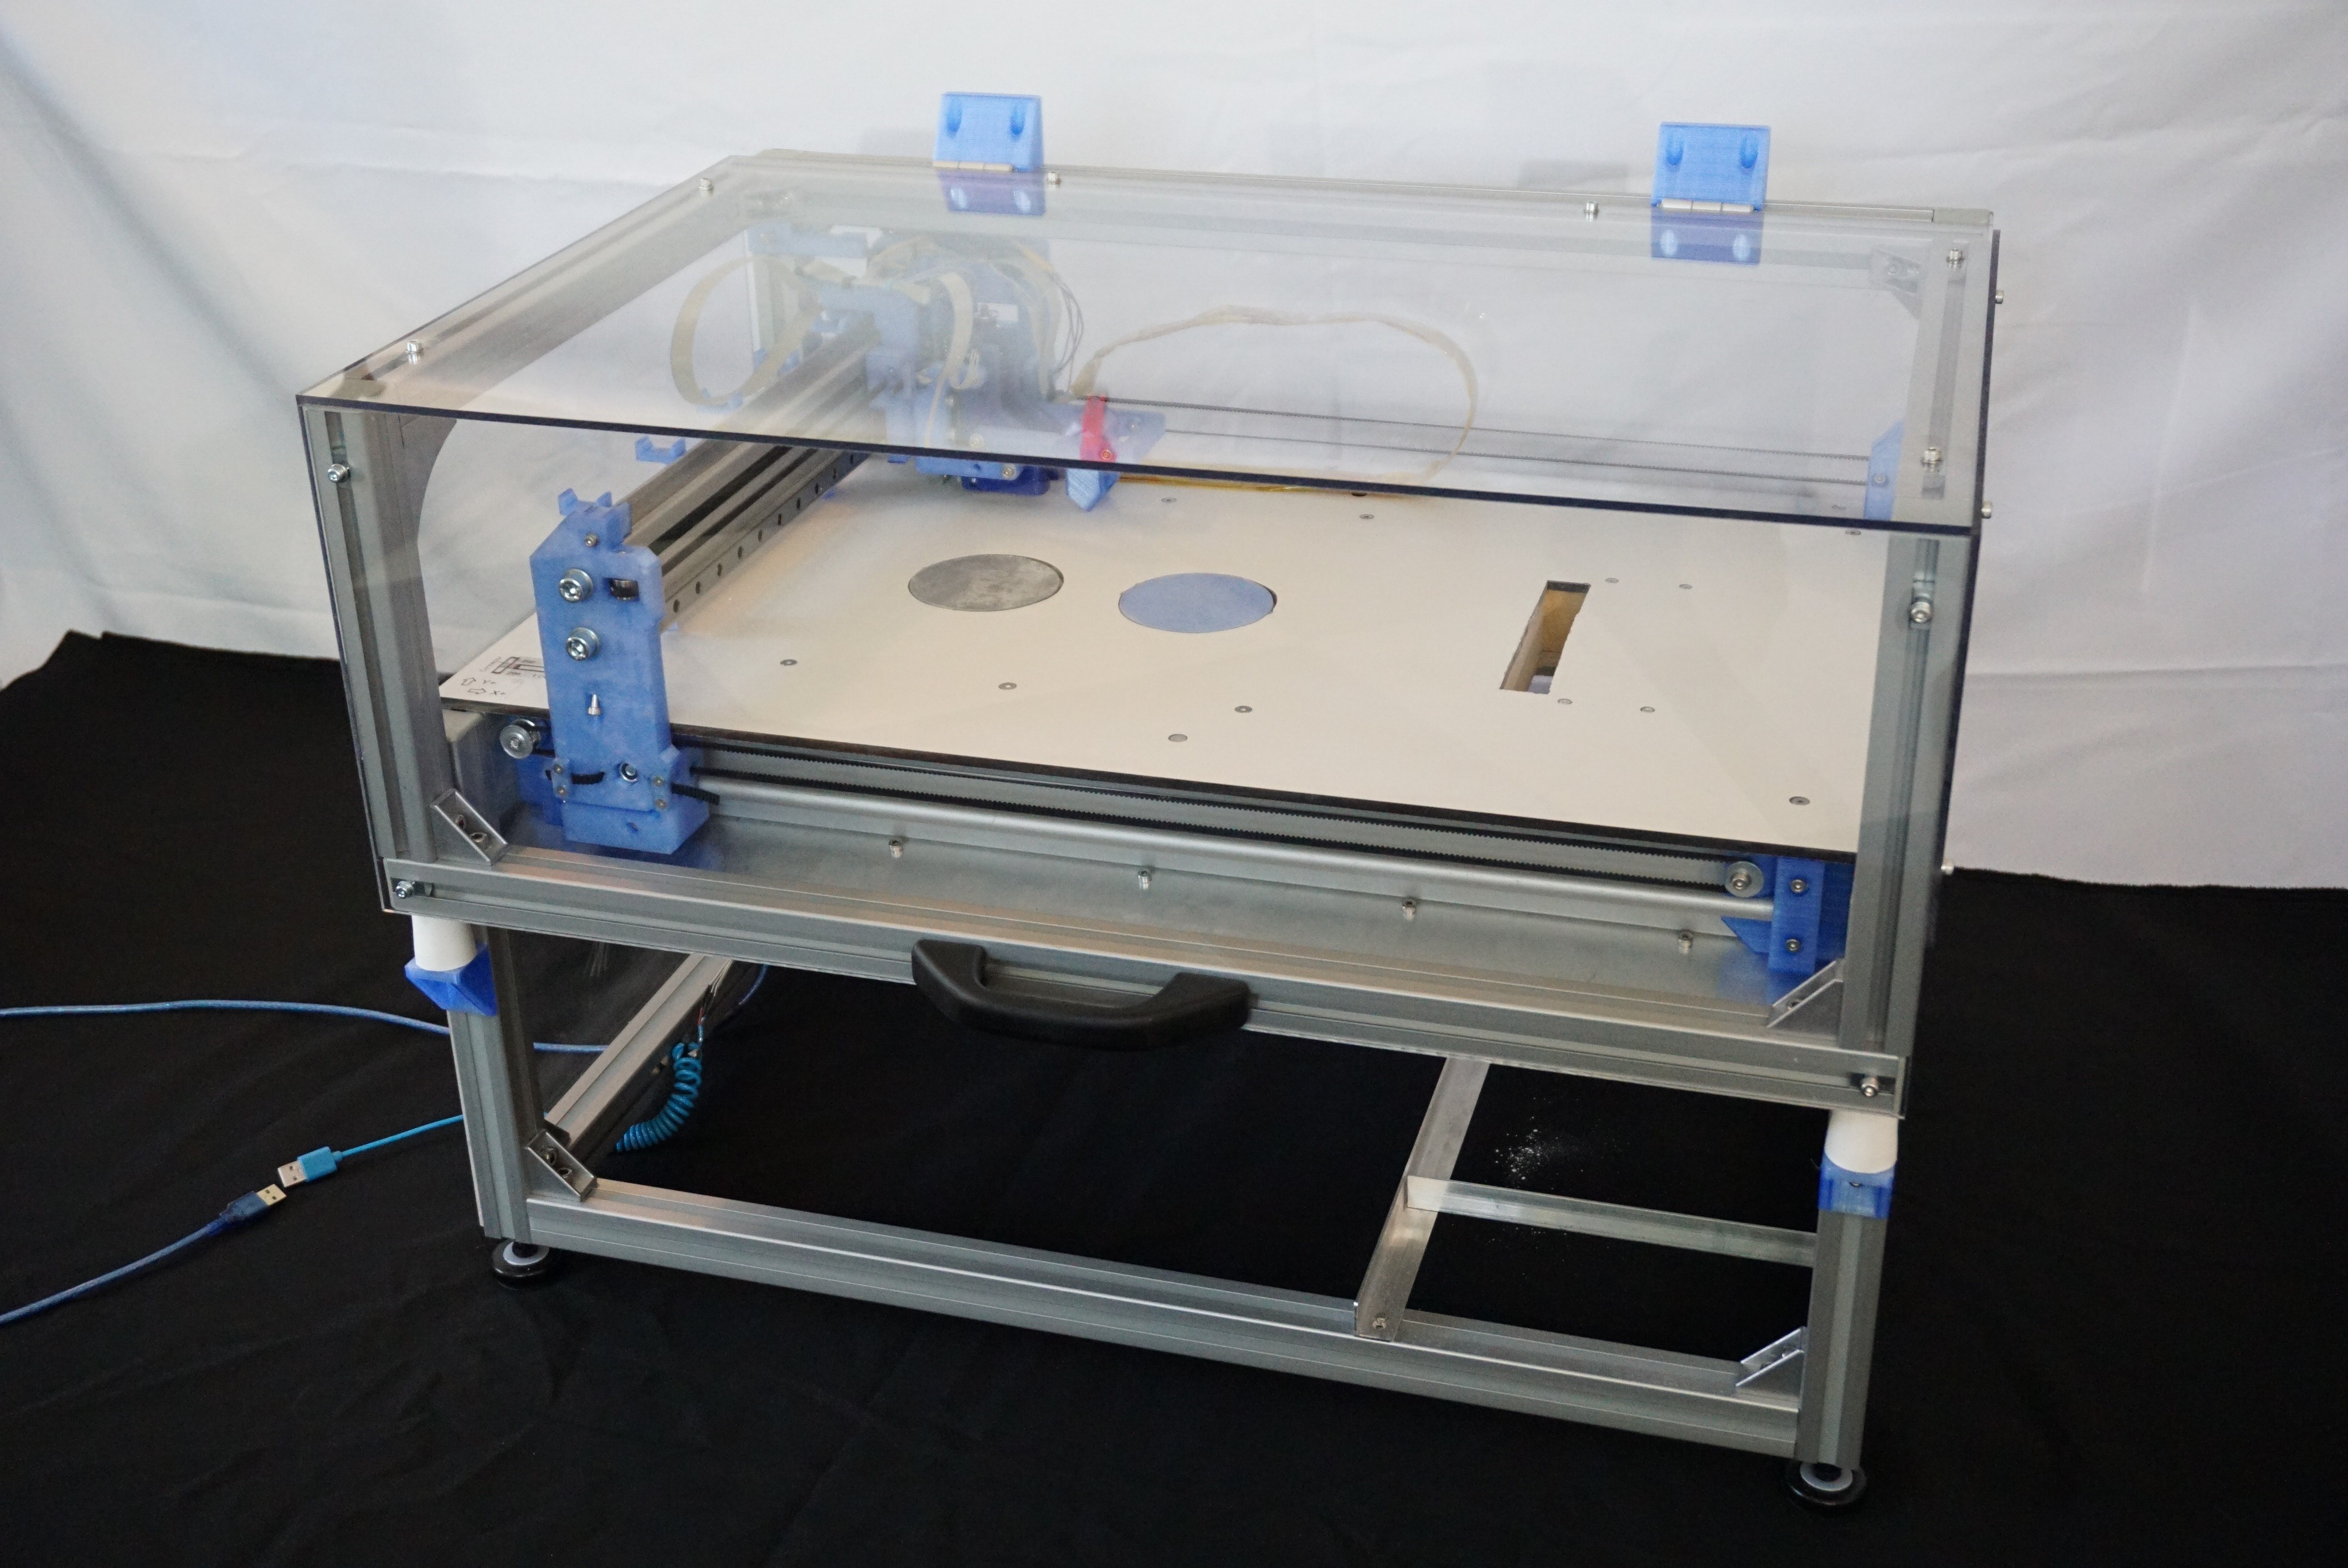 The Oasis 3DP Open Source Binder Jetting to Makers - 3DPrint.com | The Voice of 3D Printing / Manufacturing